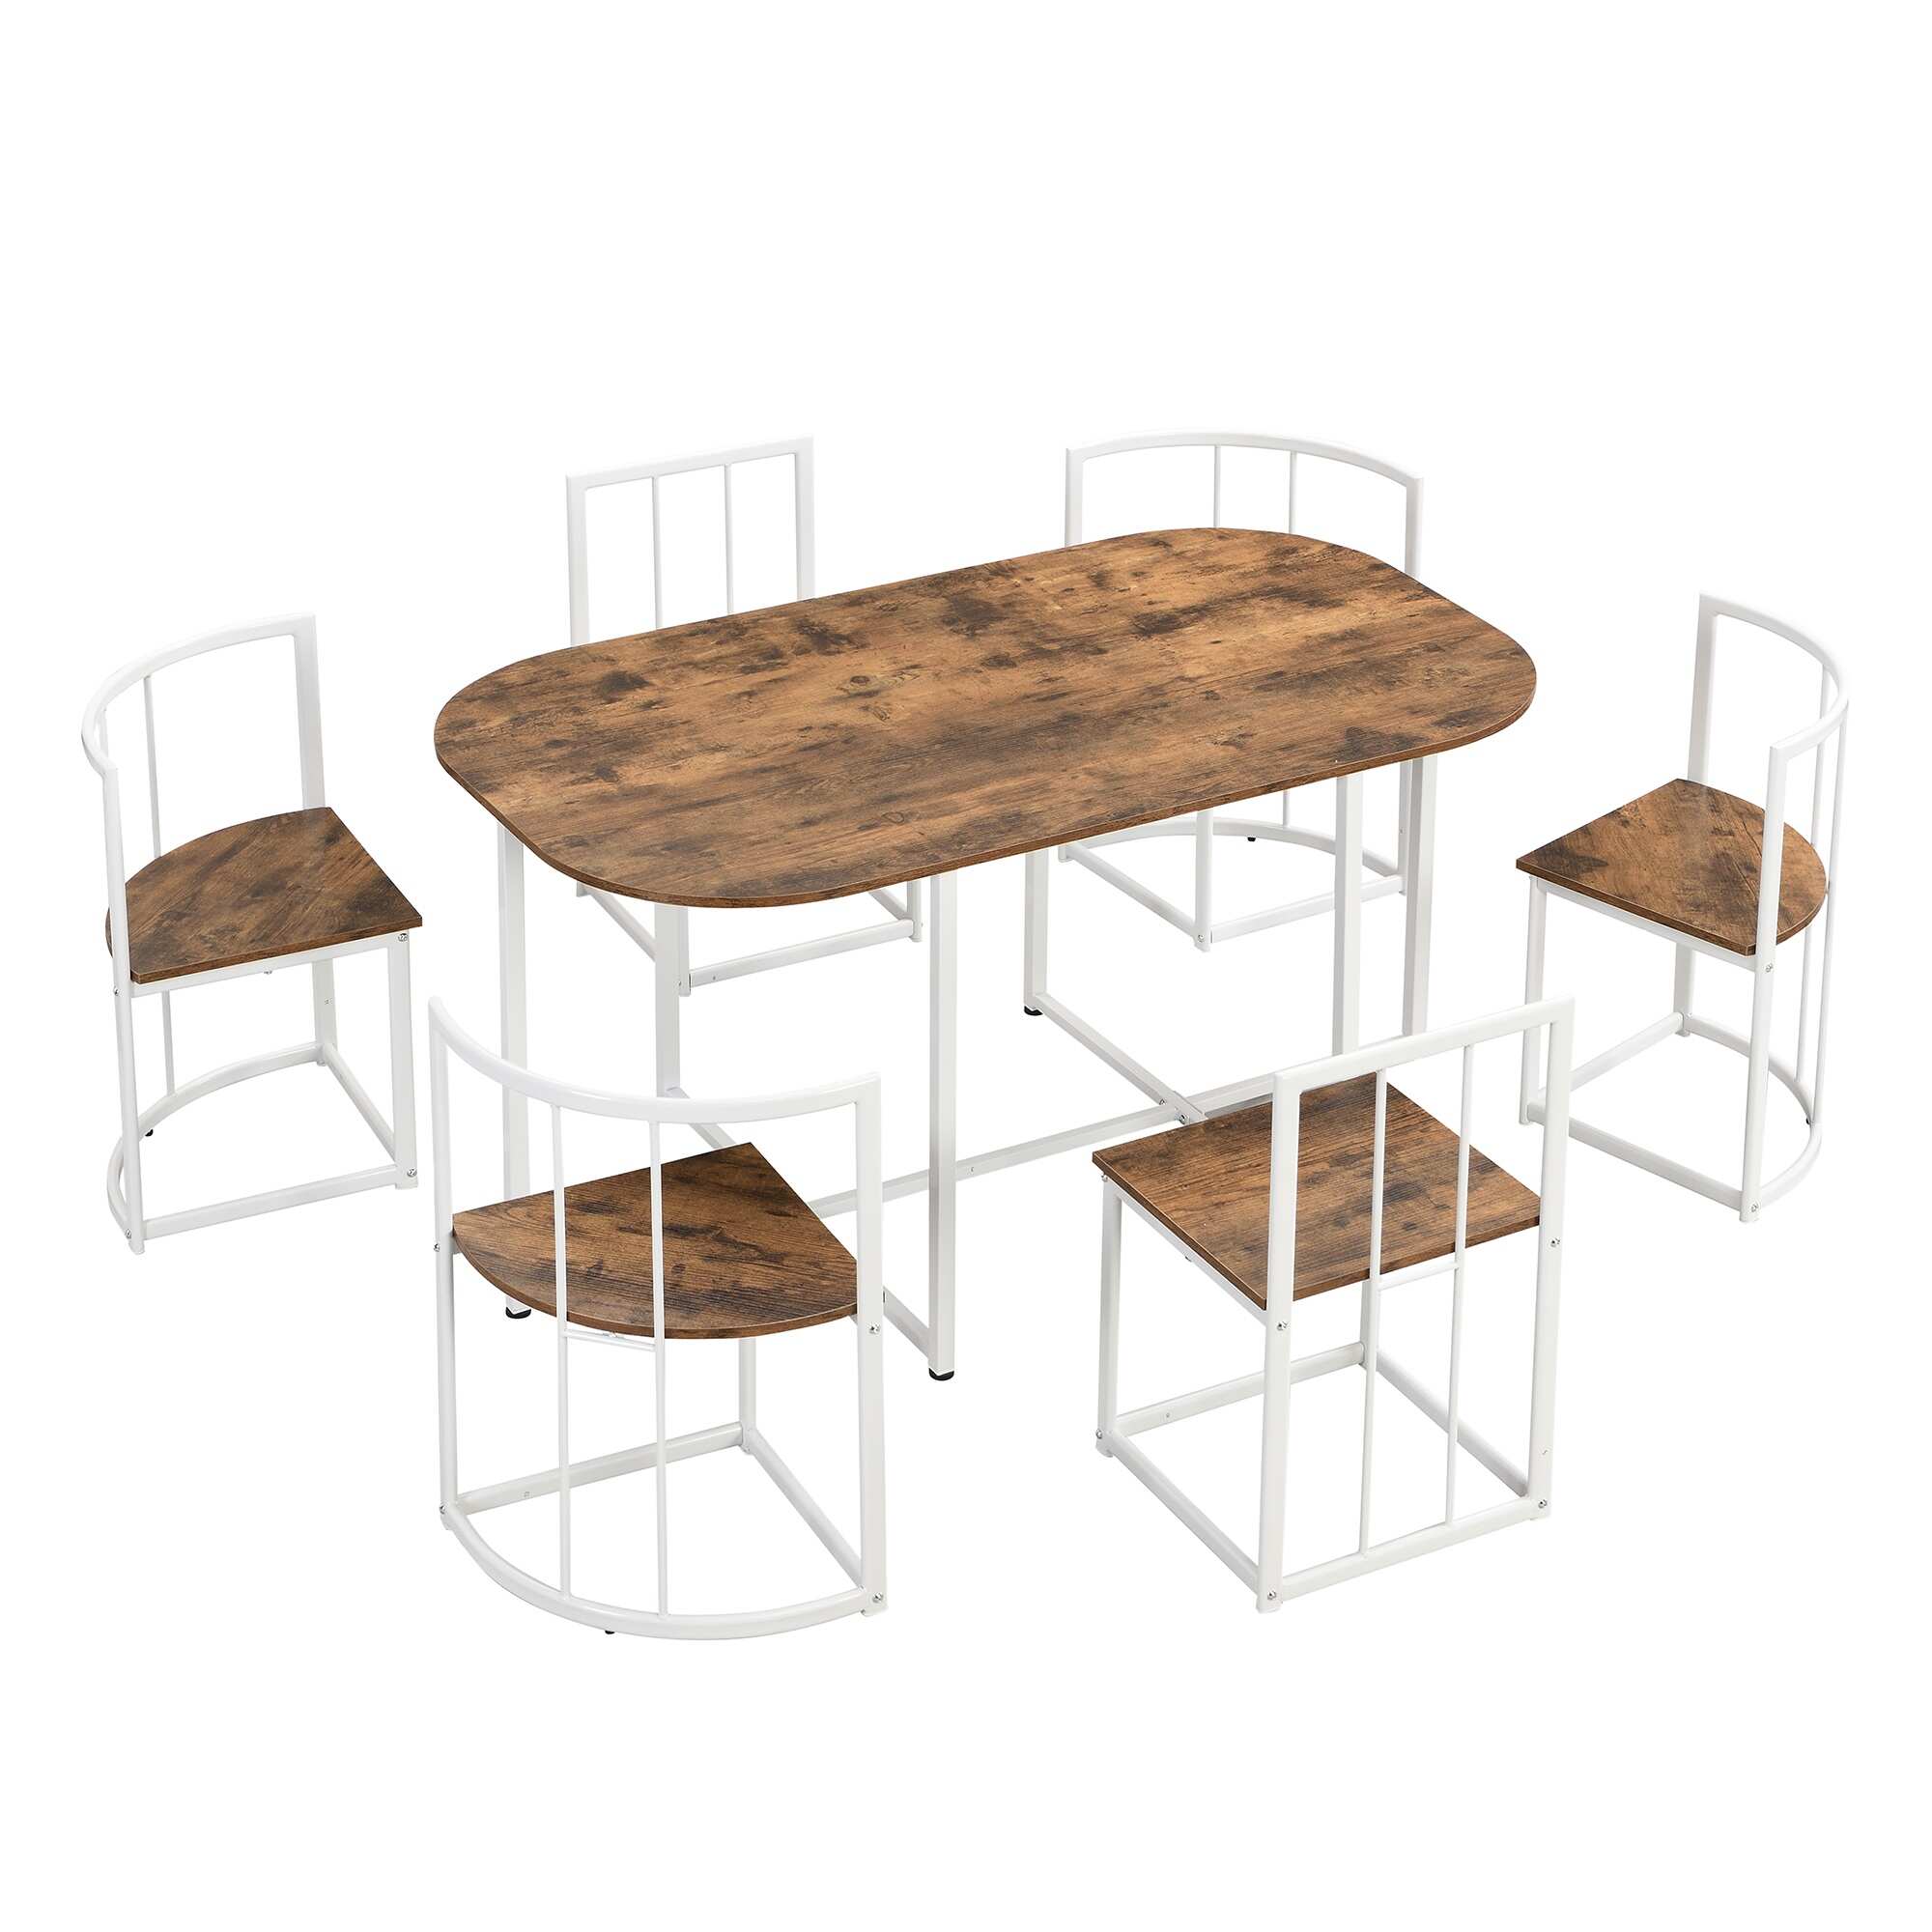 Modern 7-Piece Iron Oval Fixed Dining Table Set with 55Inch Kitchen Table and Triangular Chairs for Dining Room